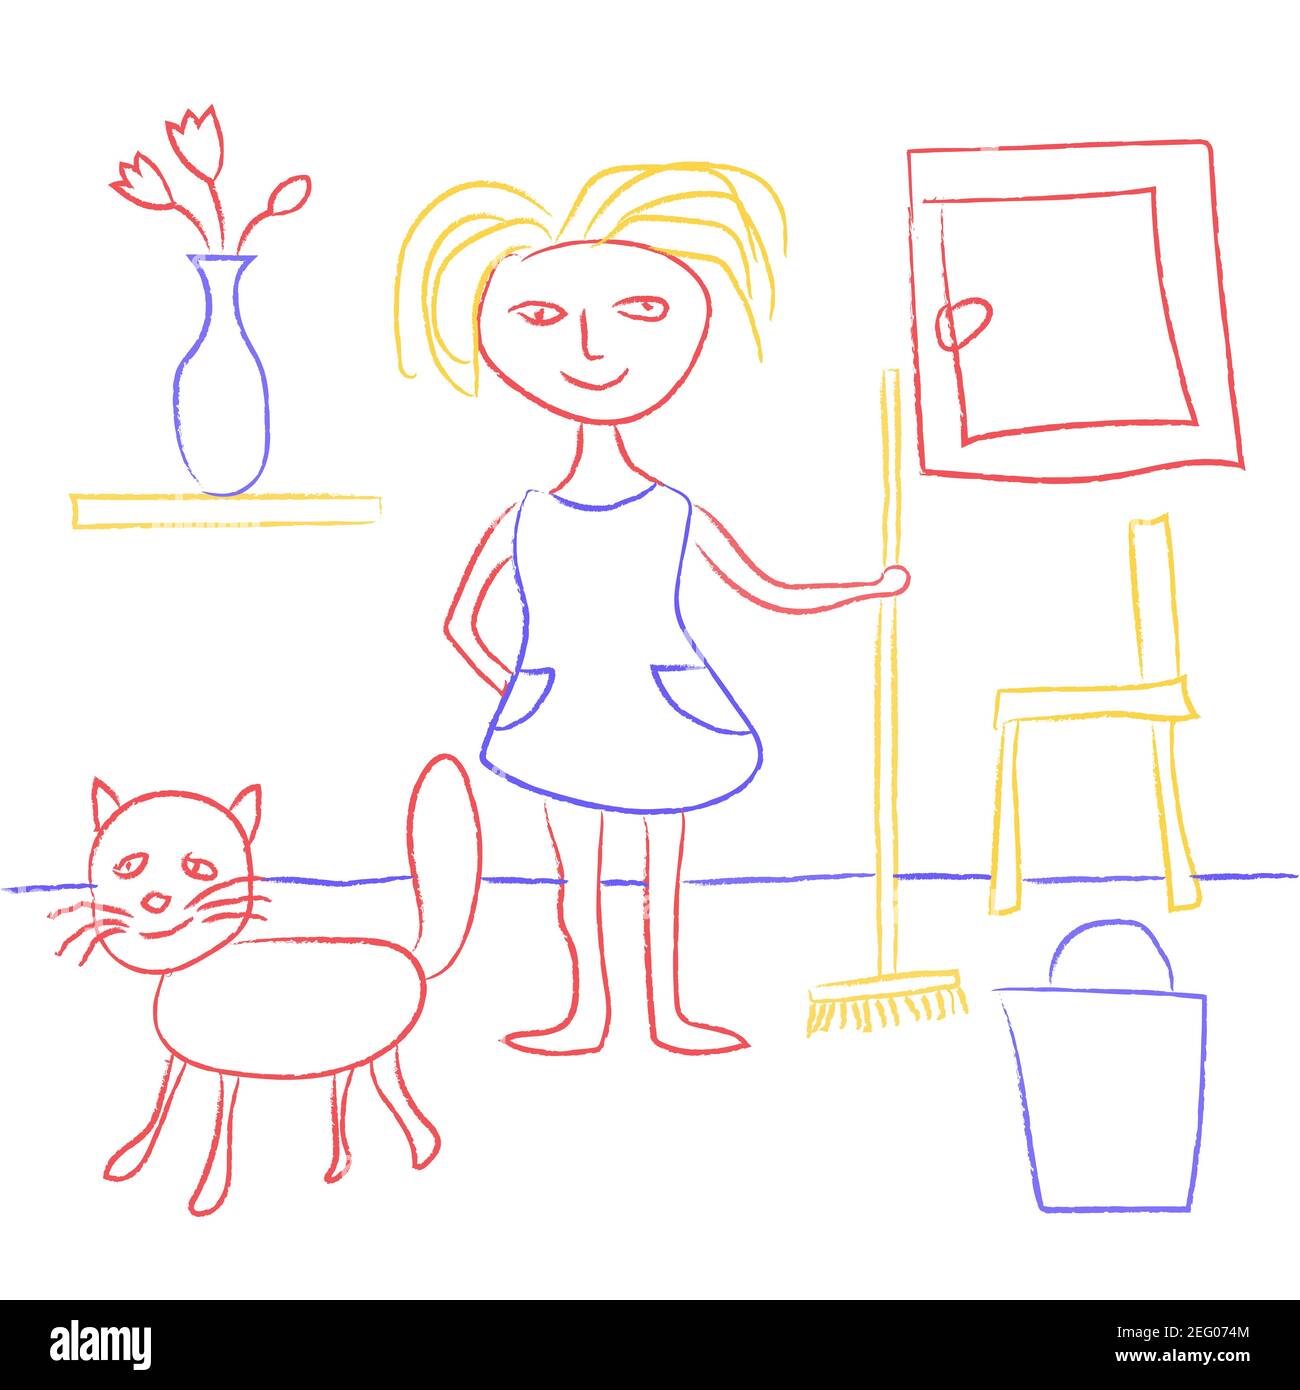 https://c8.alamy.com/comp/2EG074M/childs-drawing-with-crayons-cute-kids-doodle-depicting-a-girl-and-a-cat-at-home-cartoon-girl-or-woman-is-cleaning-up-vector-eps10-2EG074M.jpg